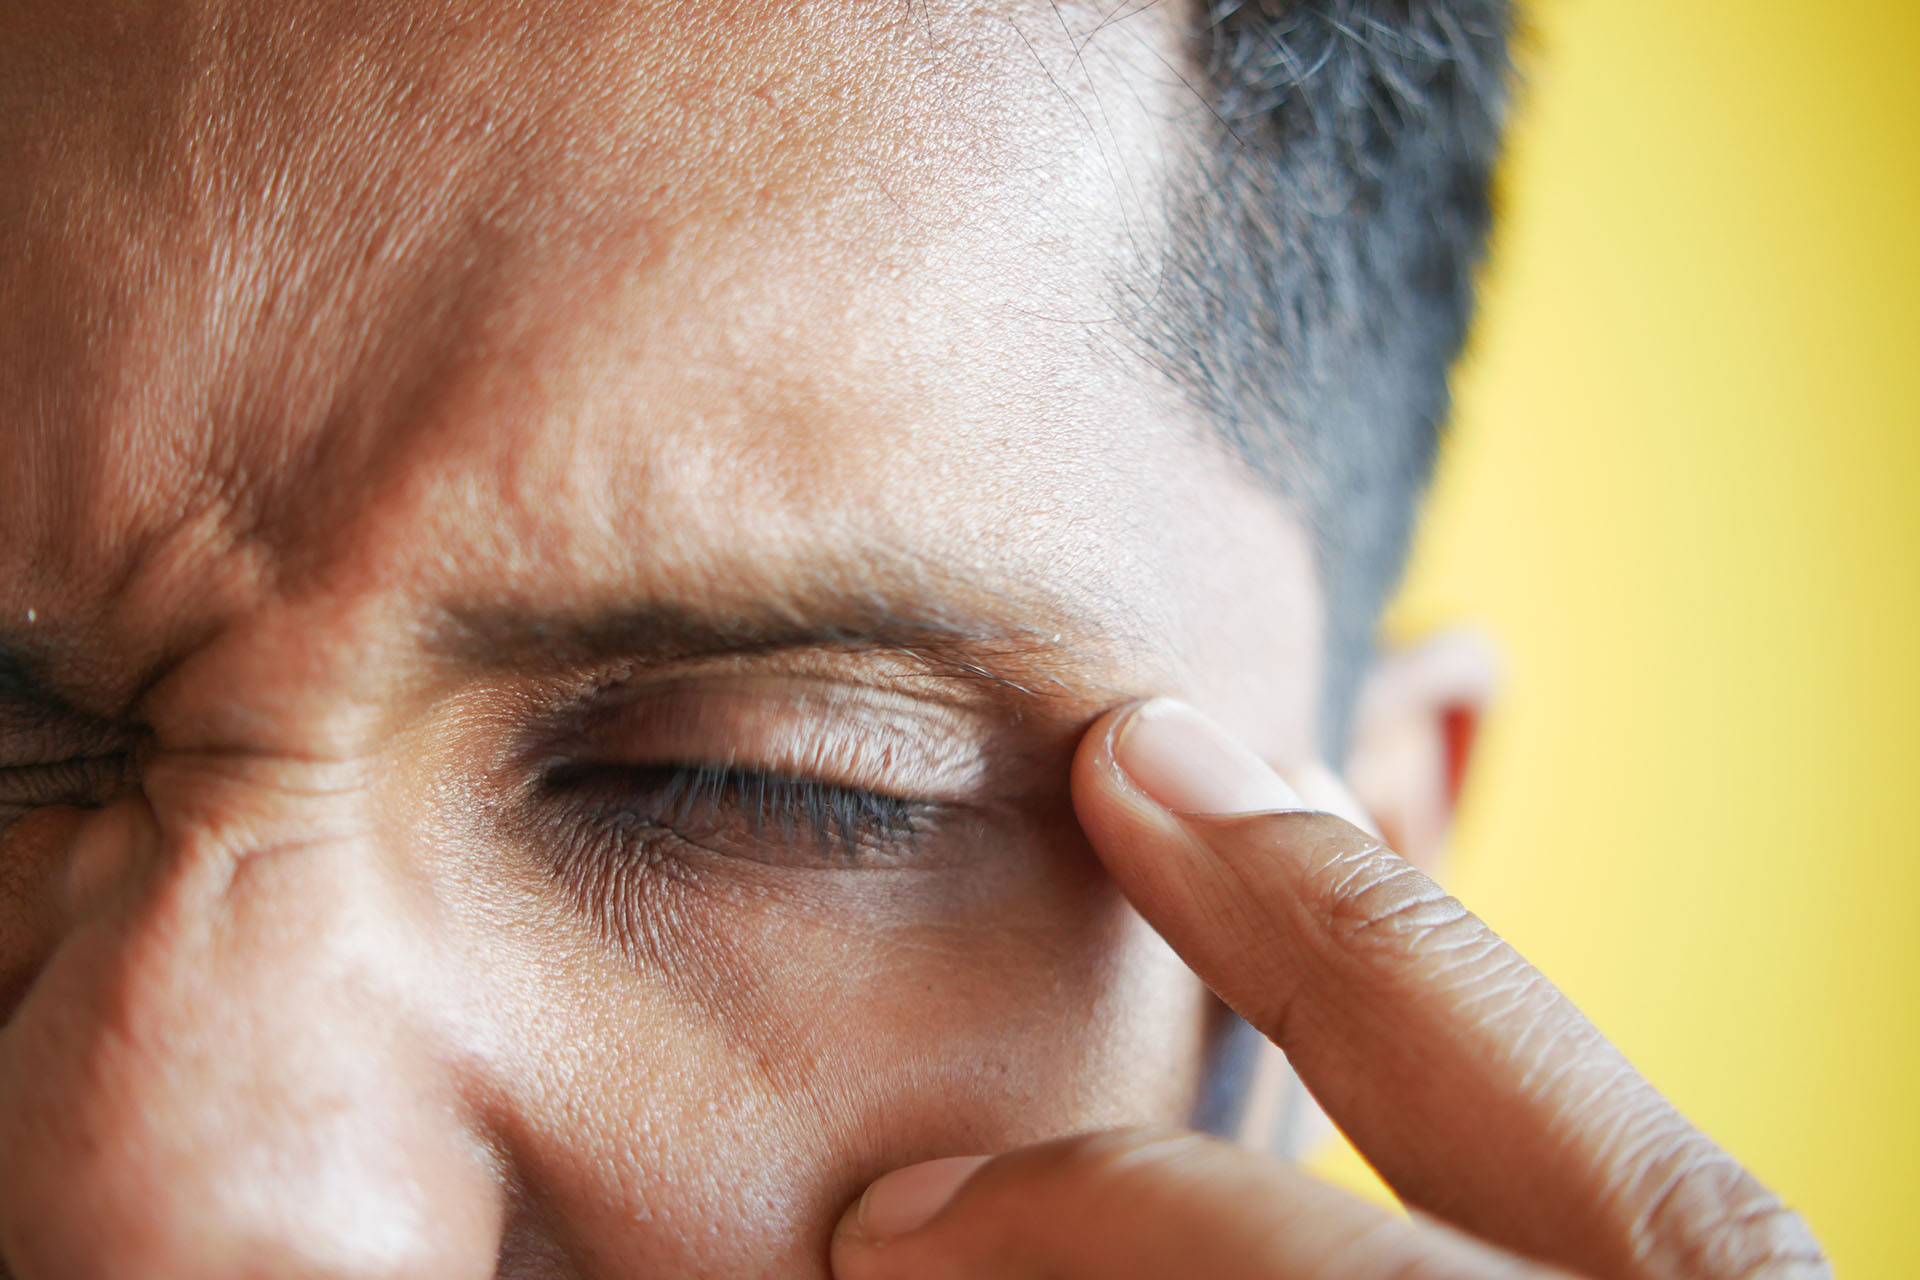 A man experiencing pain with an eye condition